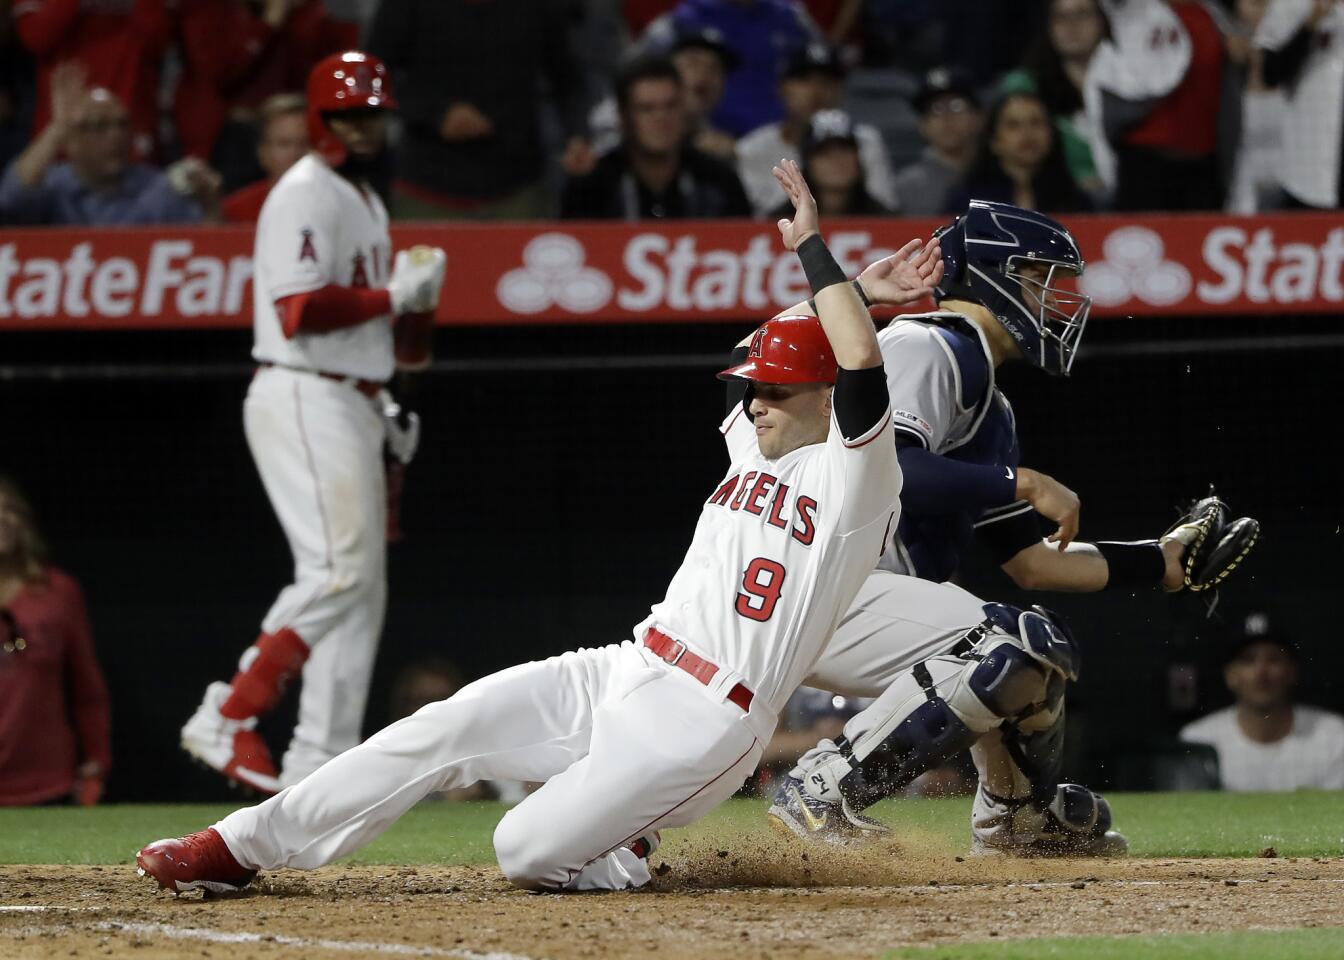 Los Angeles Angels' Tommy La Stella (9) scores past New York Yankees catcher Gary Sanchez on a single from David Fletcher during the sixth inning of a baseball game Thursday, April 25, 2019, in Anaheim, Calif. (AP Photo/Marcio Jose Sanchez)